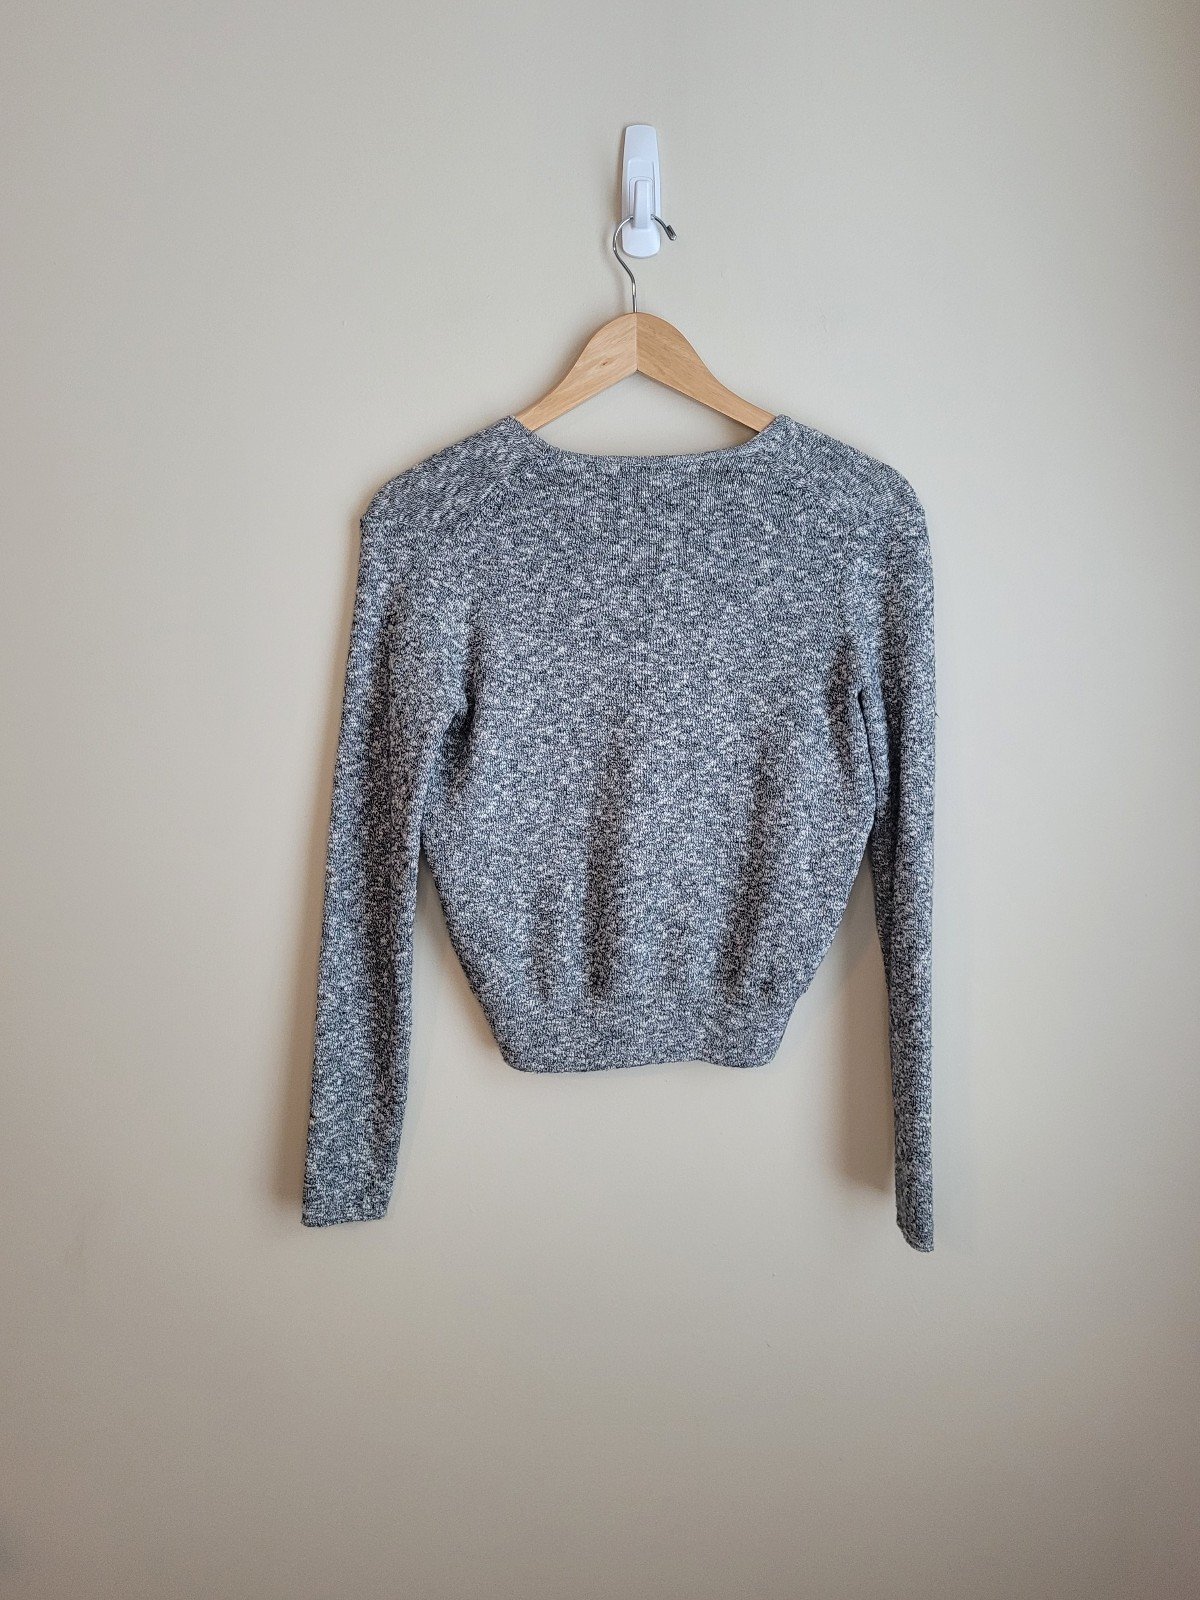 Beautiful Wrap-Front Pullover Sweater Heathered Gray Size XS inN5M1jr4 Buying Cheap